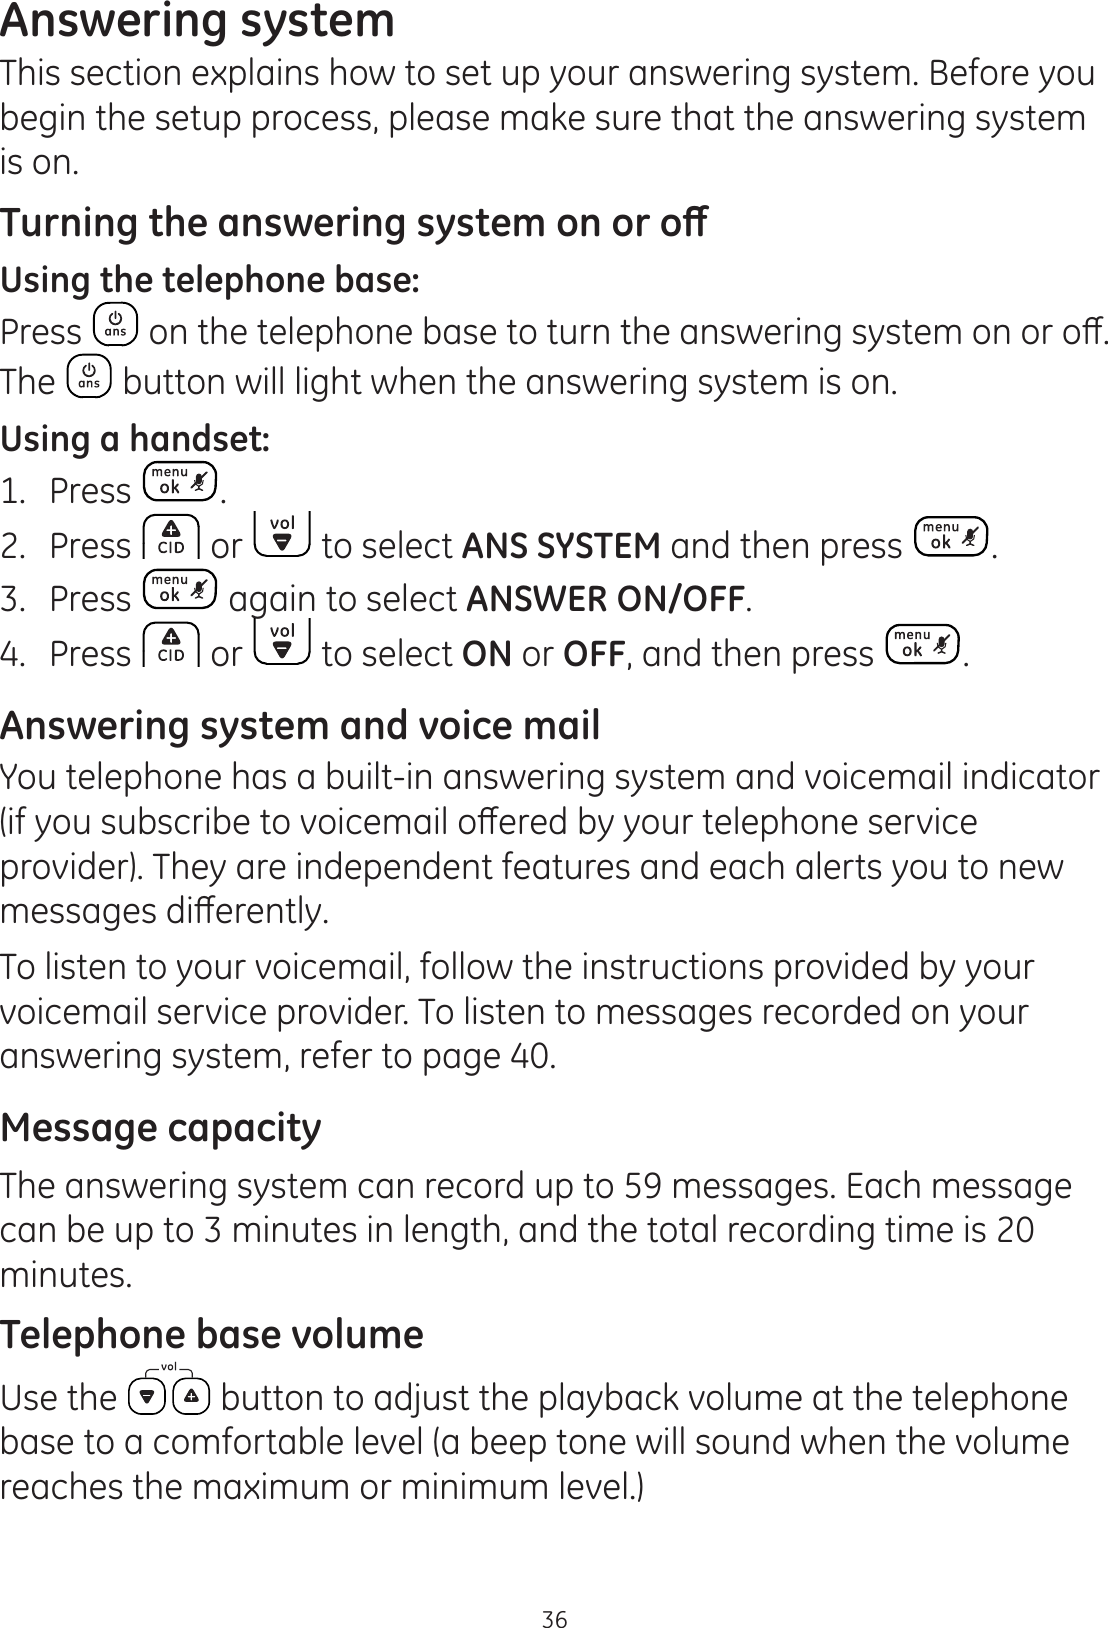 36Answering systemThis section explains how to set up your answering system. Before you begin the setup process, please make sure that the answering system is on. 7XUQLQJWKHDQVZHULQJV\VWHPRQRURȹUsing the telephone base:Press RQWKHWHOHSKRQHEDVHWRWXUQWKHDQVZHULQJV\VWHPRQRURȺThe   button will light when the answering system is on. Using a handset:1.  Press  .2.  Press   or   to select ANS SYSTEM and then press  . 3.  Press   again to select ANSWER ON/OFF.4.  Press   or   to select ON or OFF, and then press  .Answering system and voice mailYou telephone has a built-in answering system and voicemail indicator LI\RXVXEVFULEHWRYRLFHPDLORȺHUHGE\\RXUWHOHSKRQHVHUYLFHprovider). They are independent features and each alerts you to new PHVVDJHVGLȺHUHQWO\To listen to your voicemail, follow the instructions provided by your voicemail service provider. To listen to messages recorded on your answering system, refer to page 40.Message capacityThe answering system can record up to 59 messages. Each message can be up to 3 minutes in length, and the total recording time is 20 minutes. Telephone base volumeUse the   button to adjust the playback volume at the telephone base to a comfortable level (a beep tone will sound when the volume reaches the maximum or minimum level.)